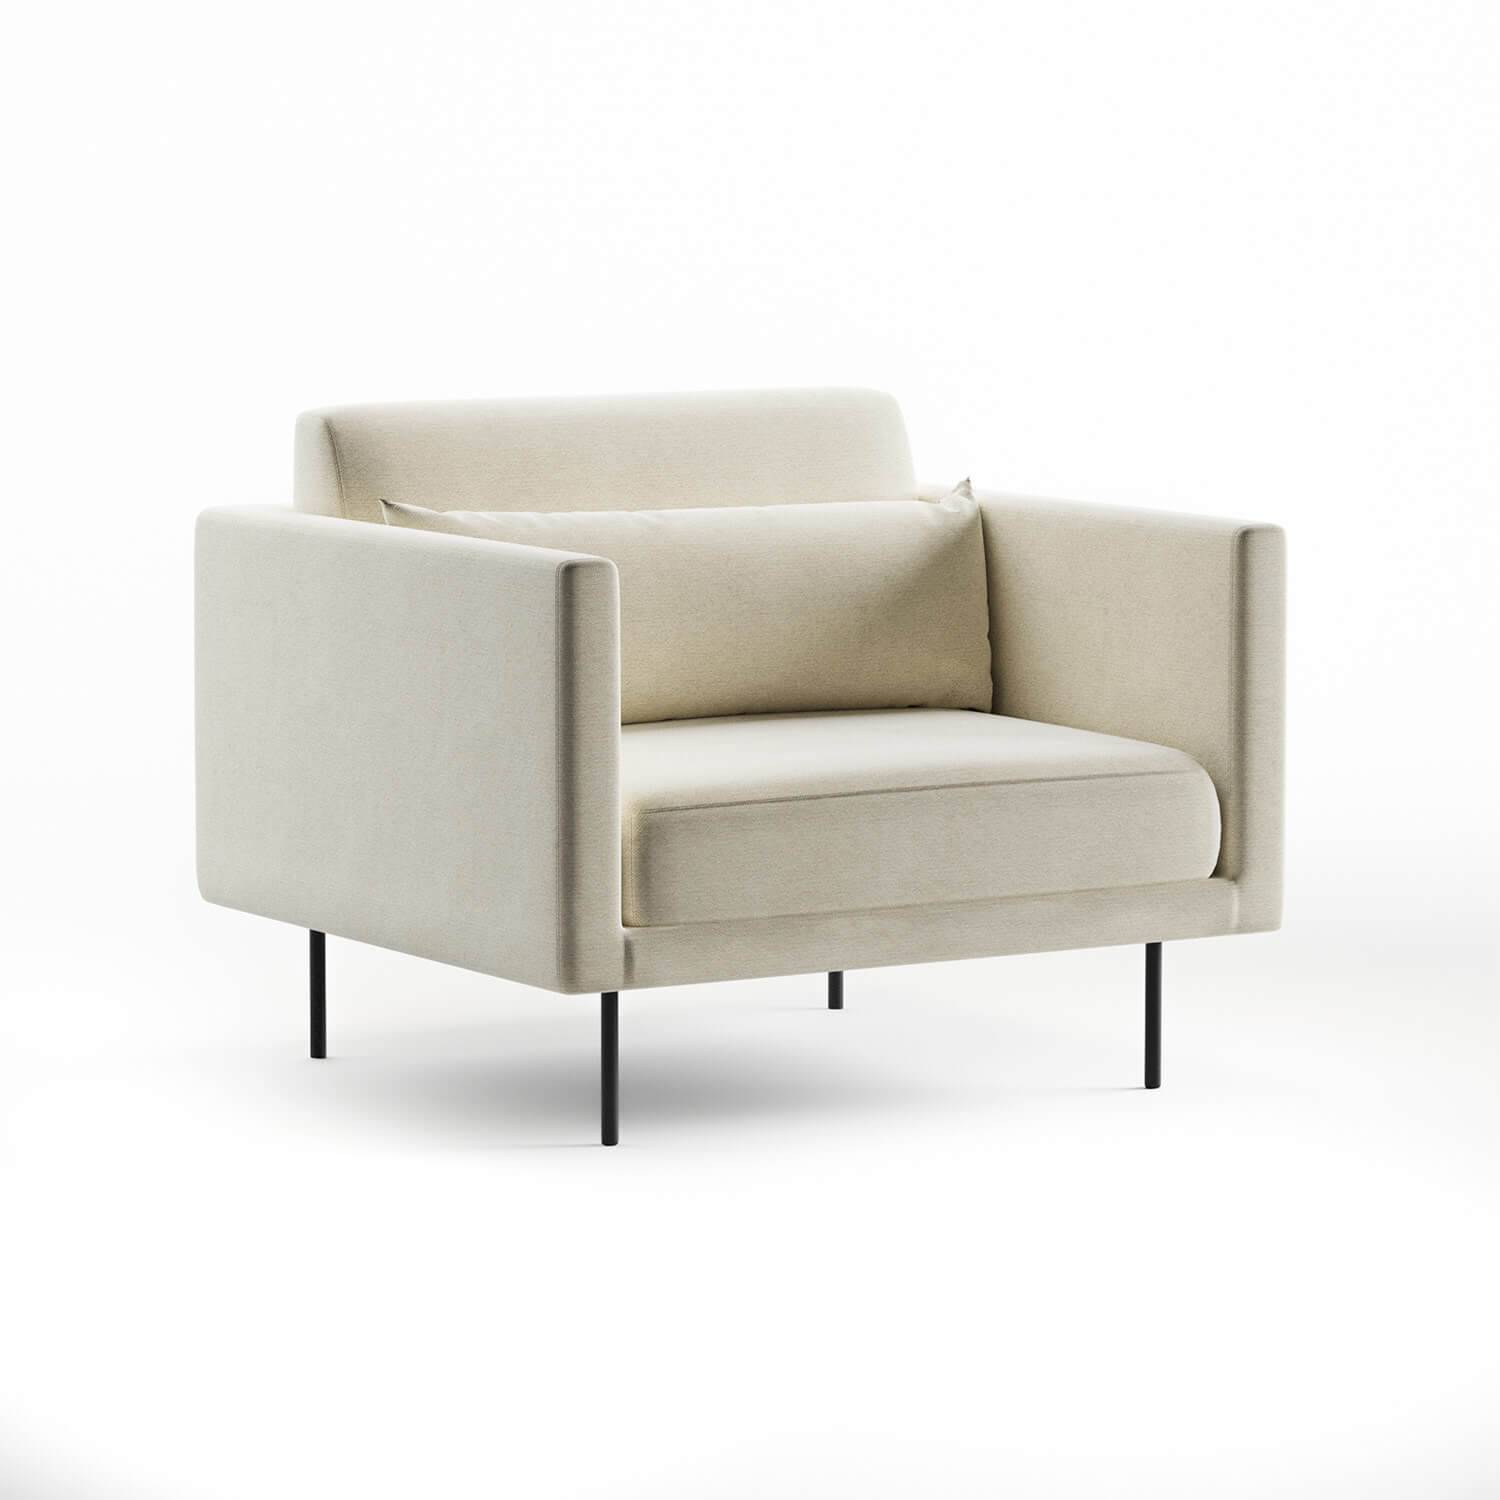 theo one seater chair